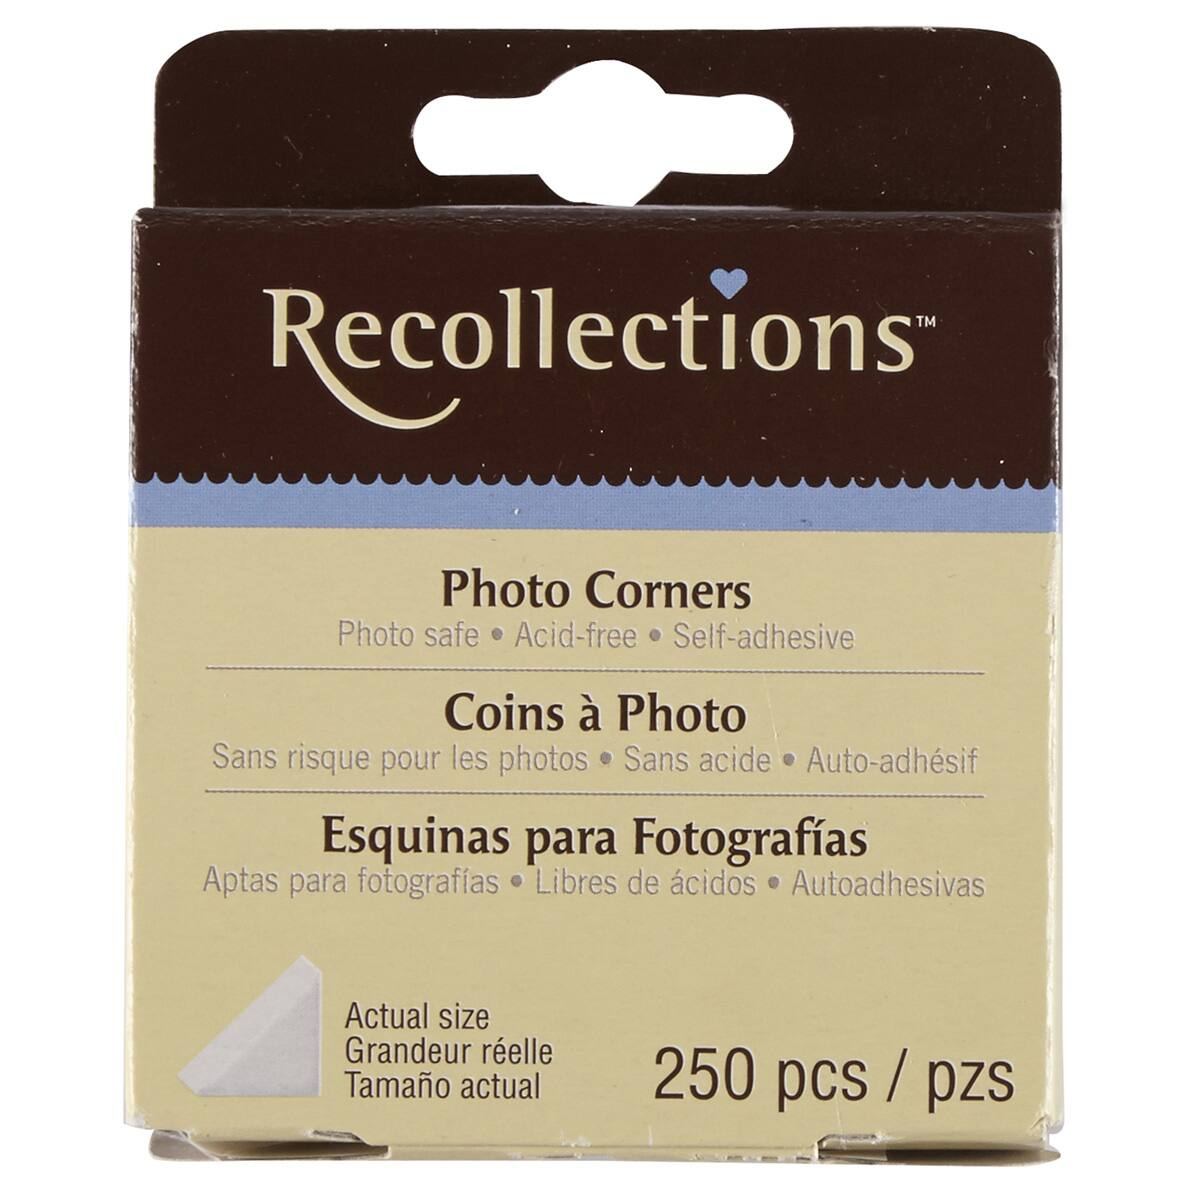 Black 2 Packs Recollections Self Adhesive Decorative Photo Corners for Scrapbooks 210 Pcs/Pack